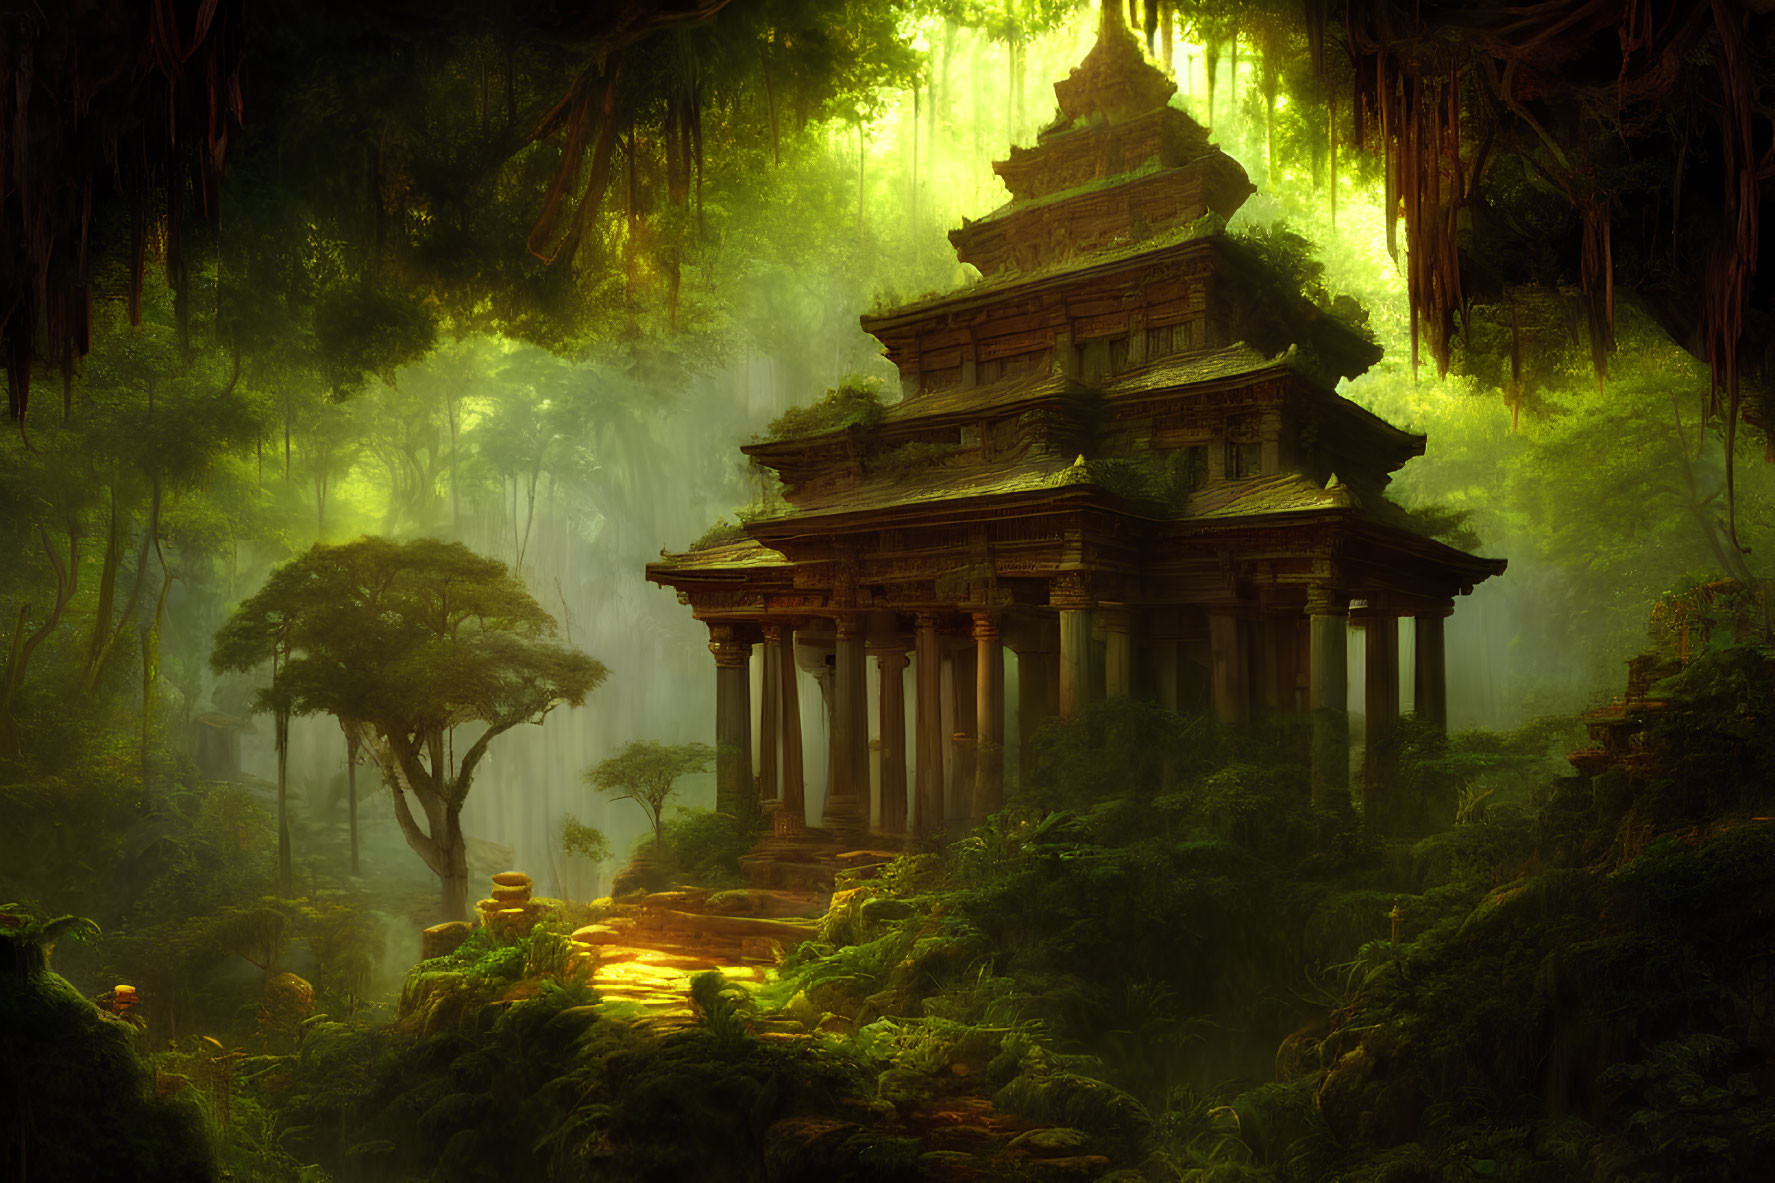 Ancient temple in lush forest with sunbeams filtering through canopy